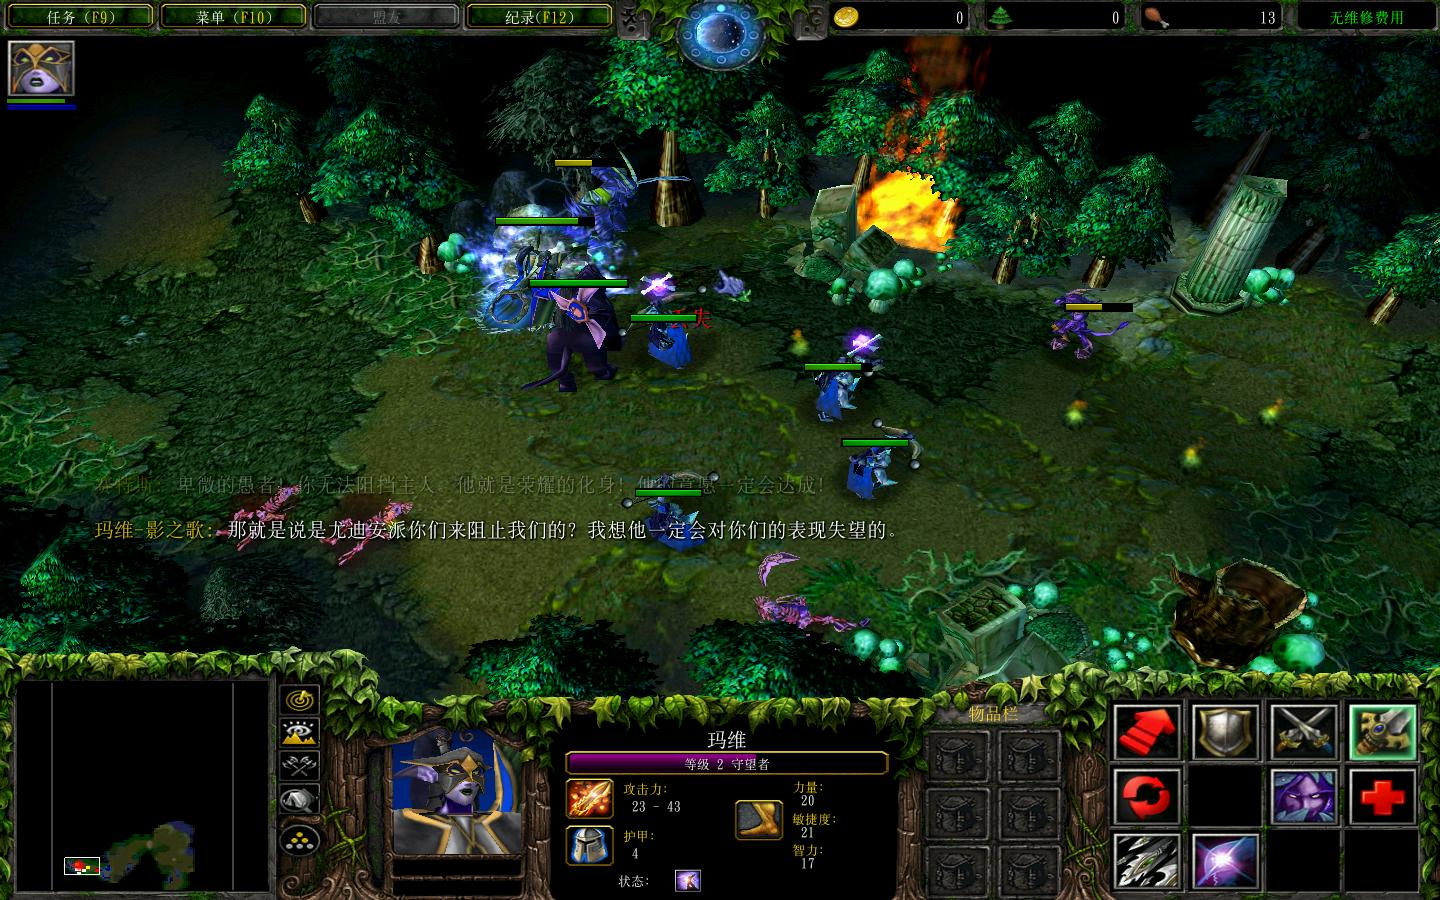 ħ3Warcraft III The Frozen Thronev1.24E³v1.2.6